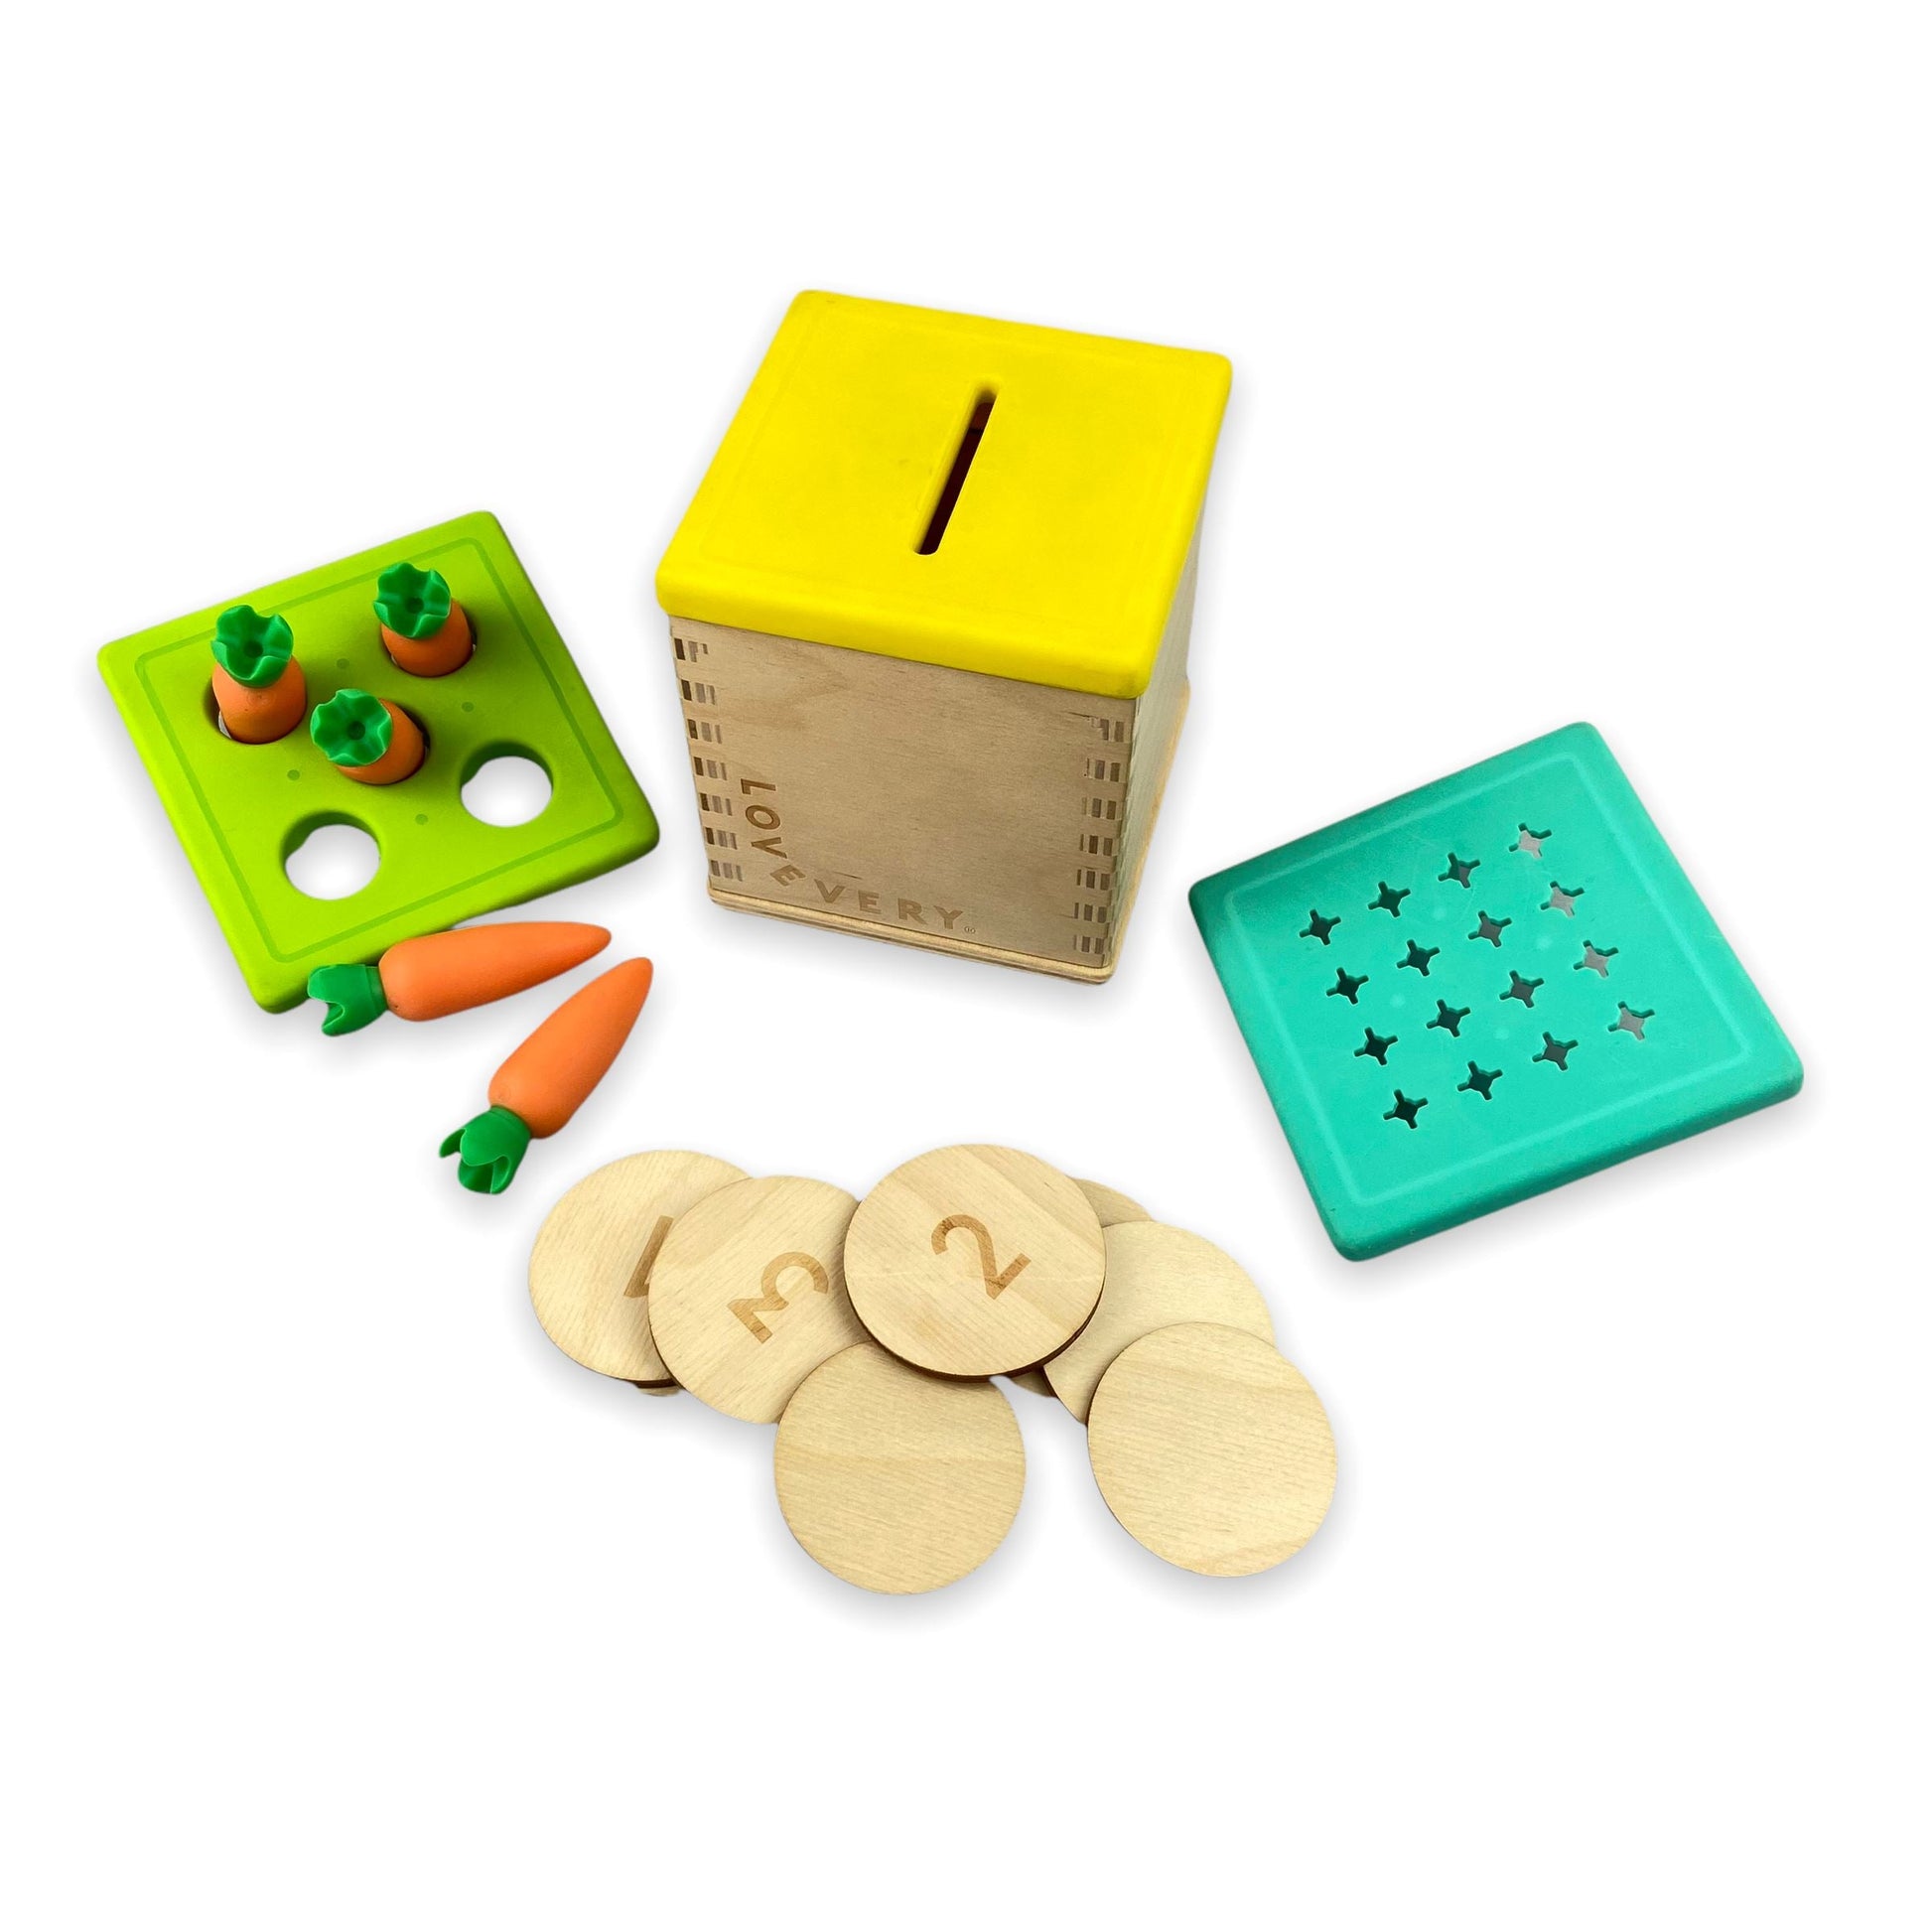 Lovevery Wooden Coin Bank Set 